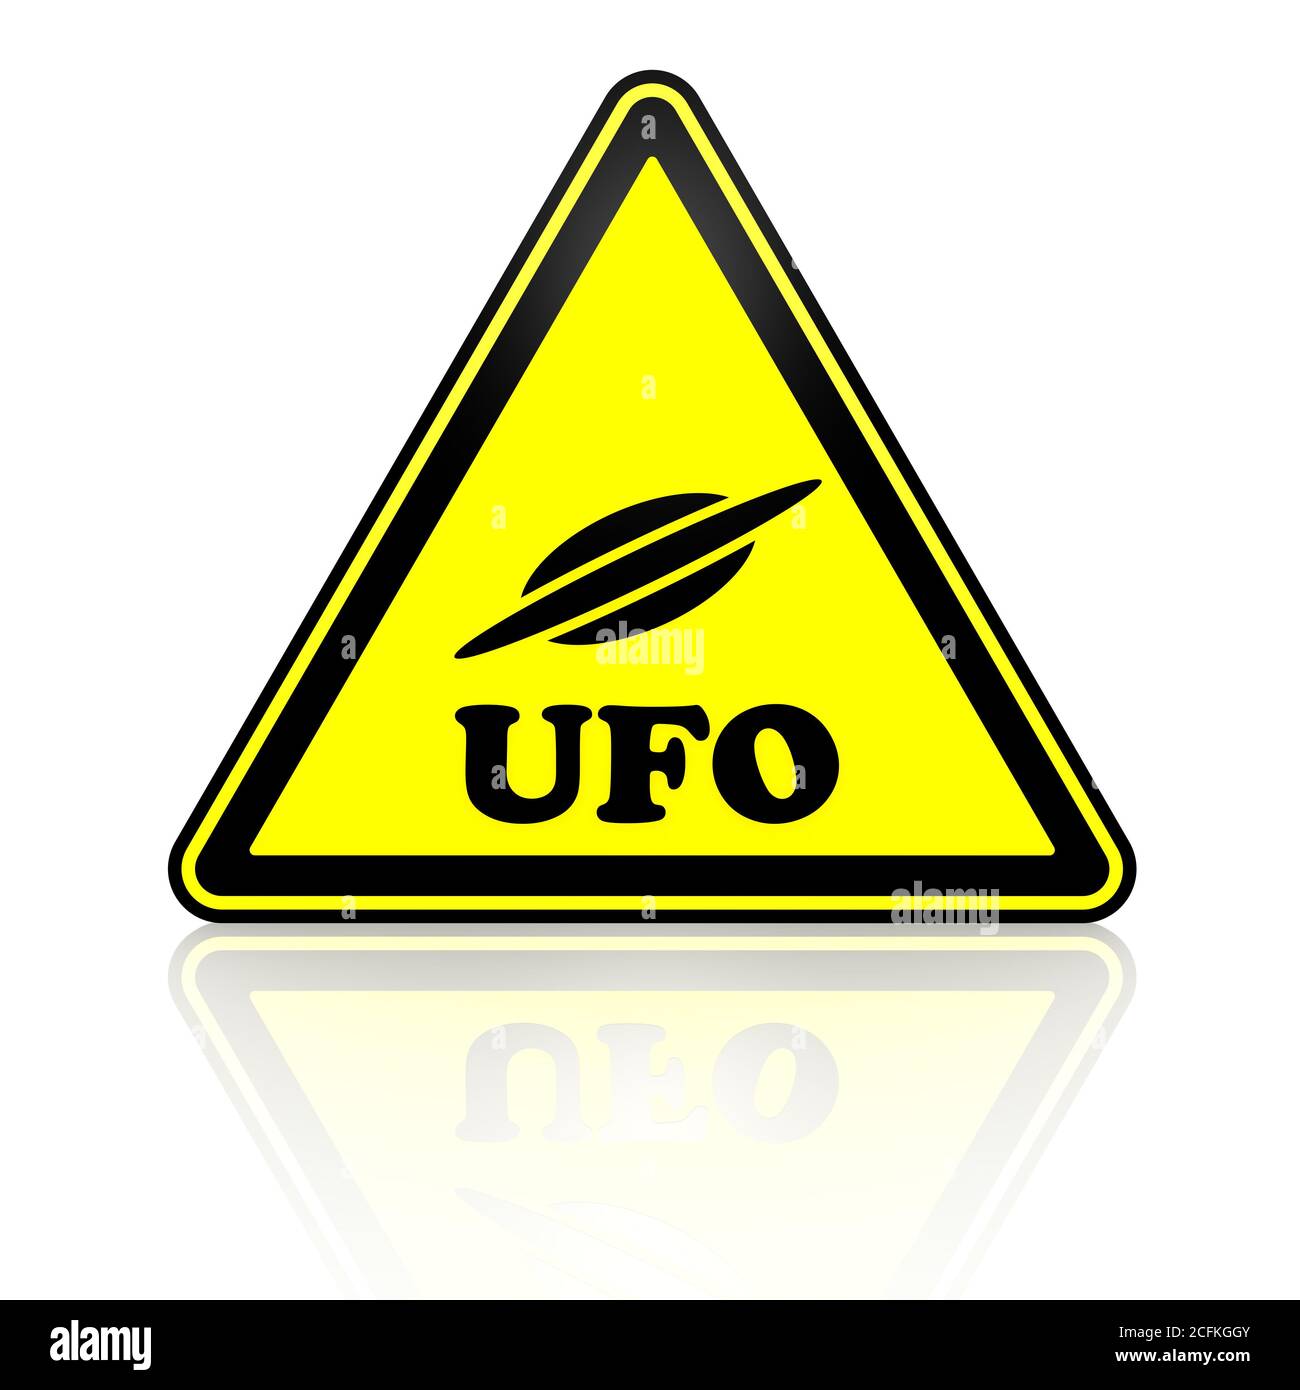 Warning sign with flying saucer symbol and word UFO (Unidentified Flying Object). 3D Illustration Stock Photo